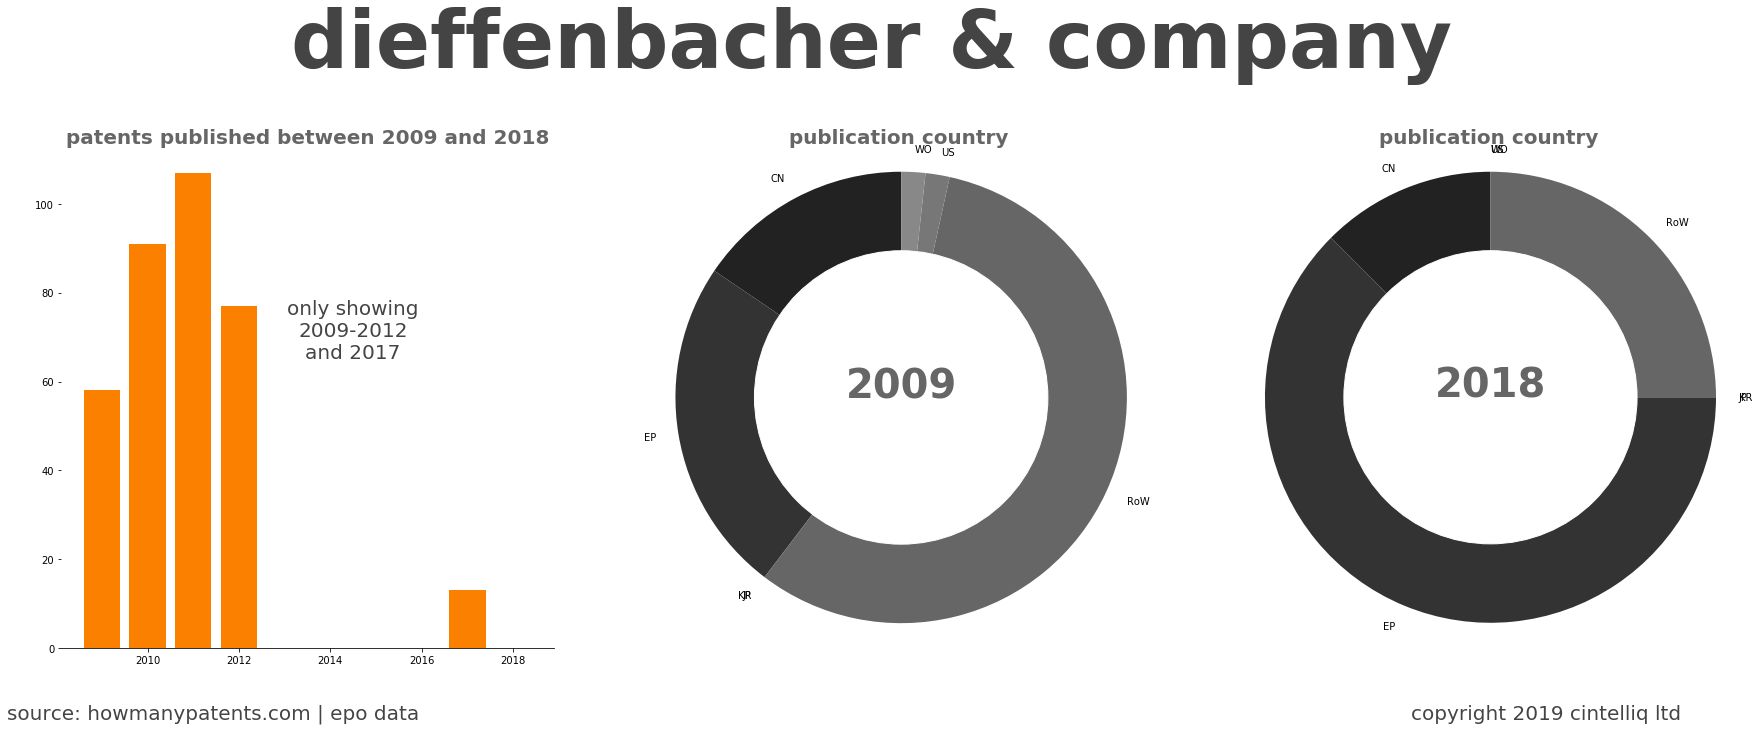 summary of patents for Dieffenbacher & Company